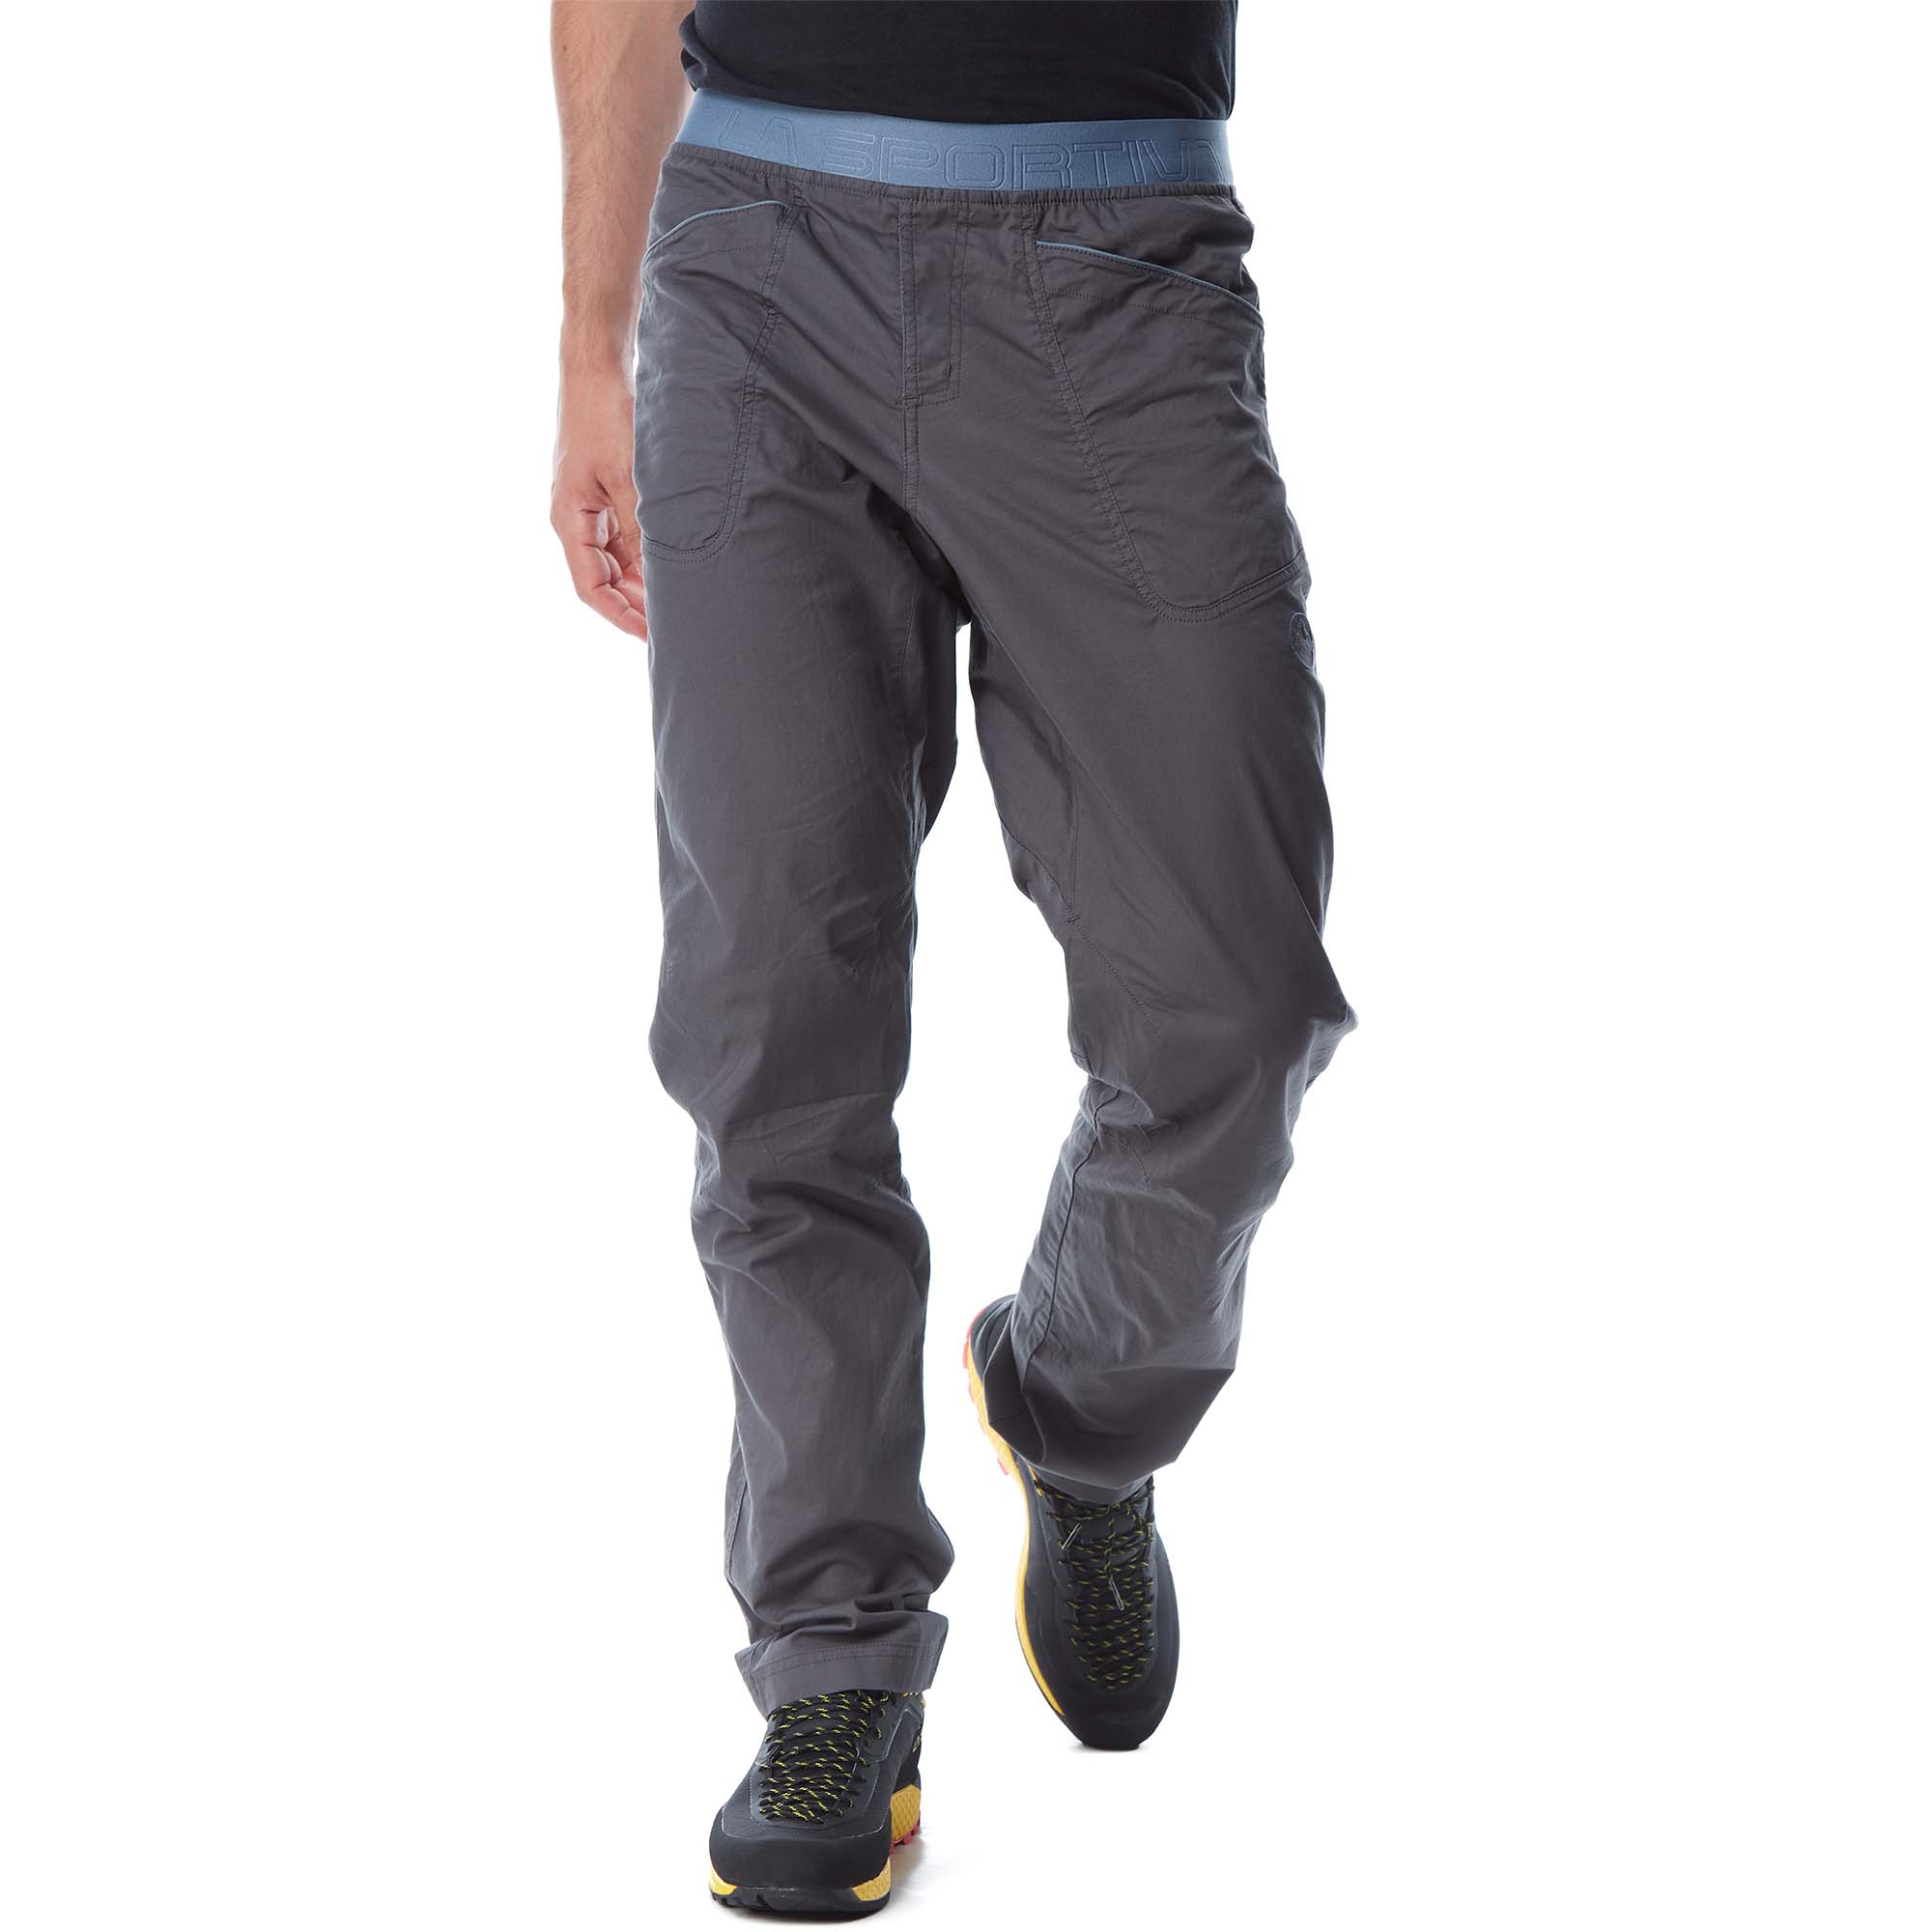 Ortovox Colodri Pants Mens Climbing Pants - Pants - Outdoor Clothing -  Outdoor - All